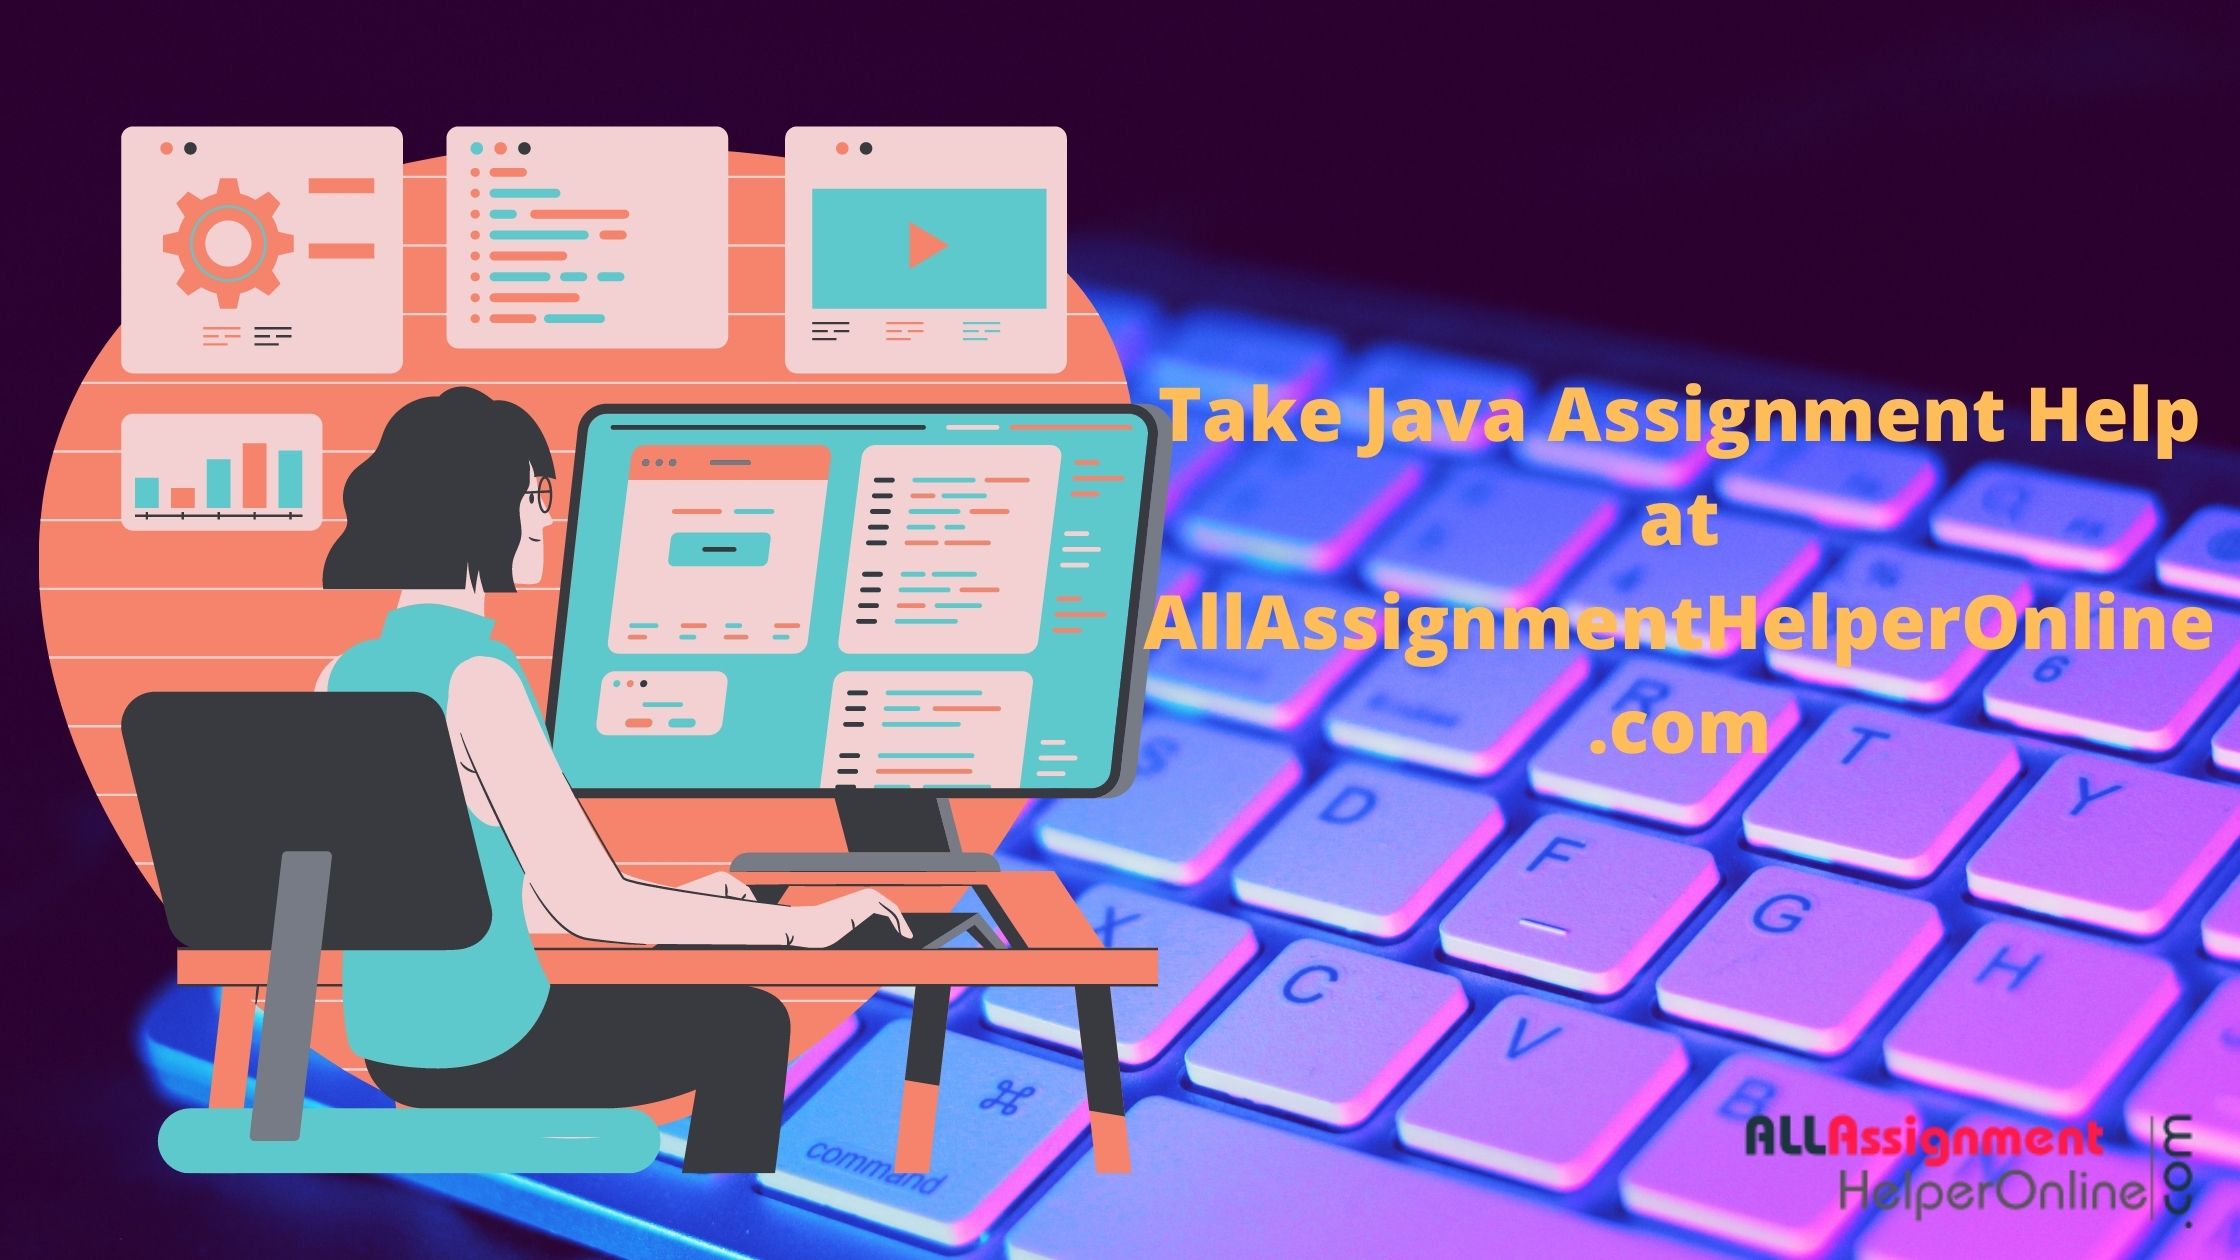 Take Java Assignment Help at AllAssignmentHelperOnline